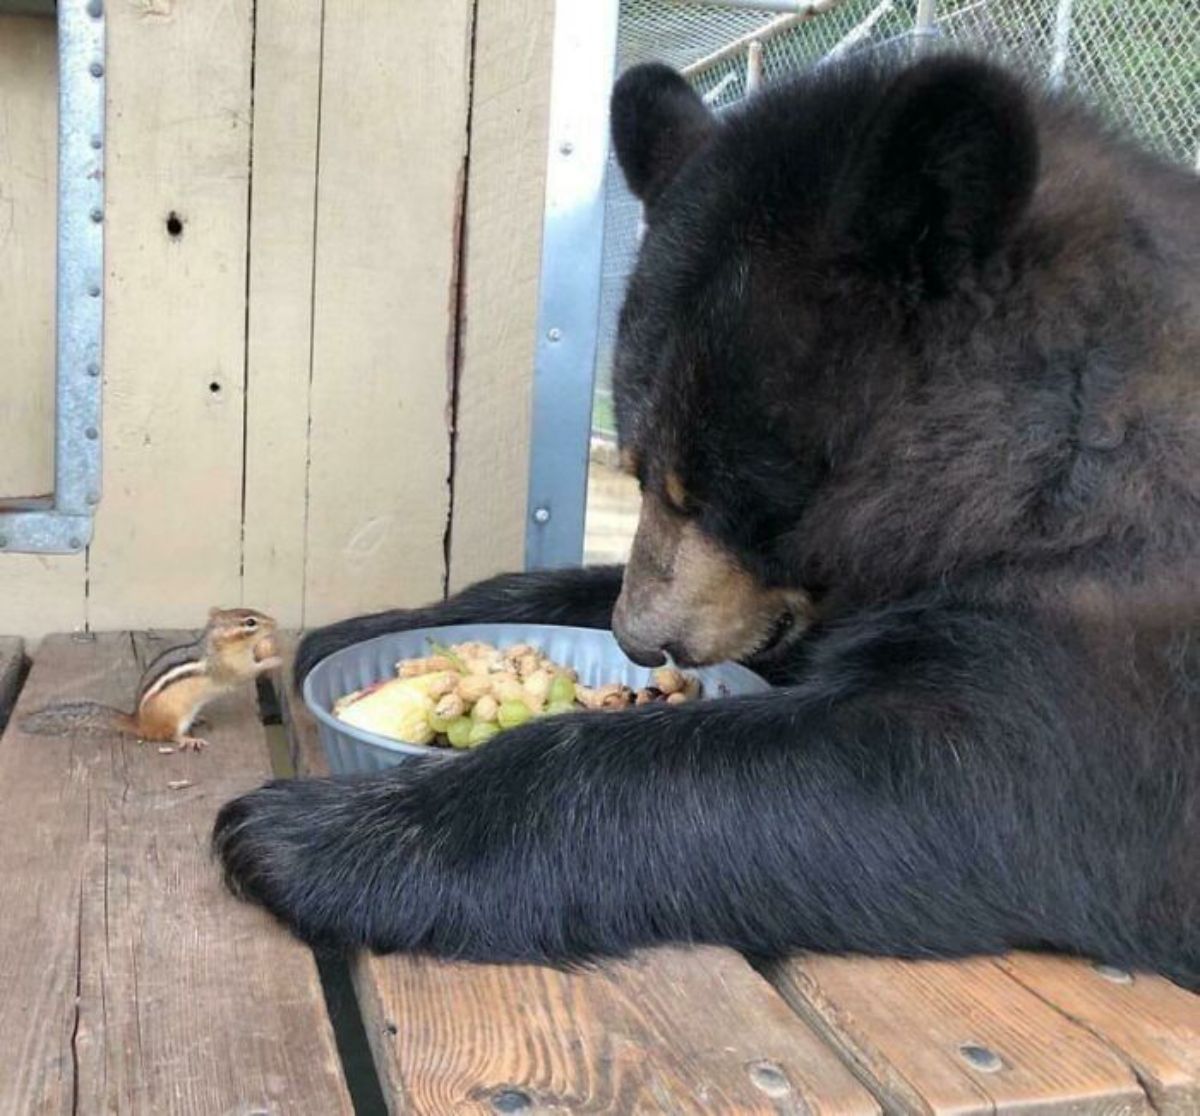 black bear sitting at a table in front of a bowl of food with a chipmunk standing on the table eating food in front of the bear